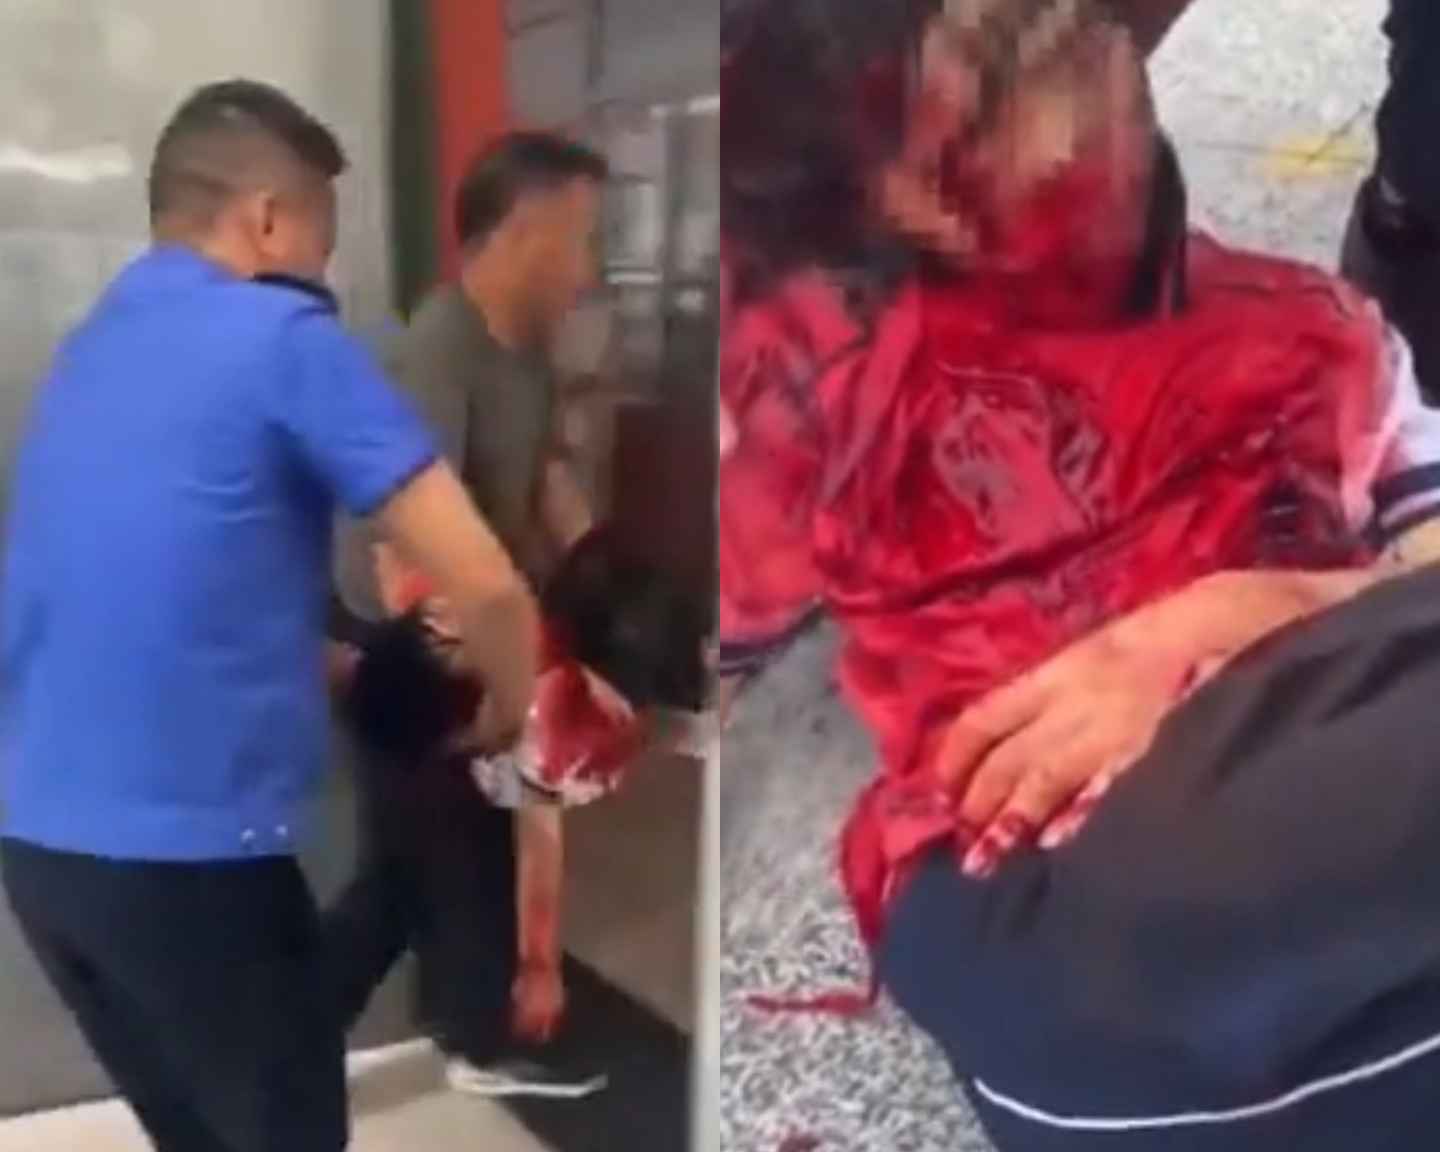 Woman Attacks Elementary School Kids with Knife in China (10 Injured, 2 Dead)